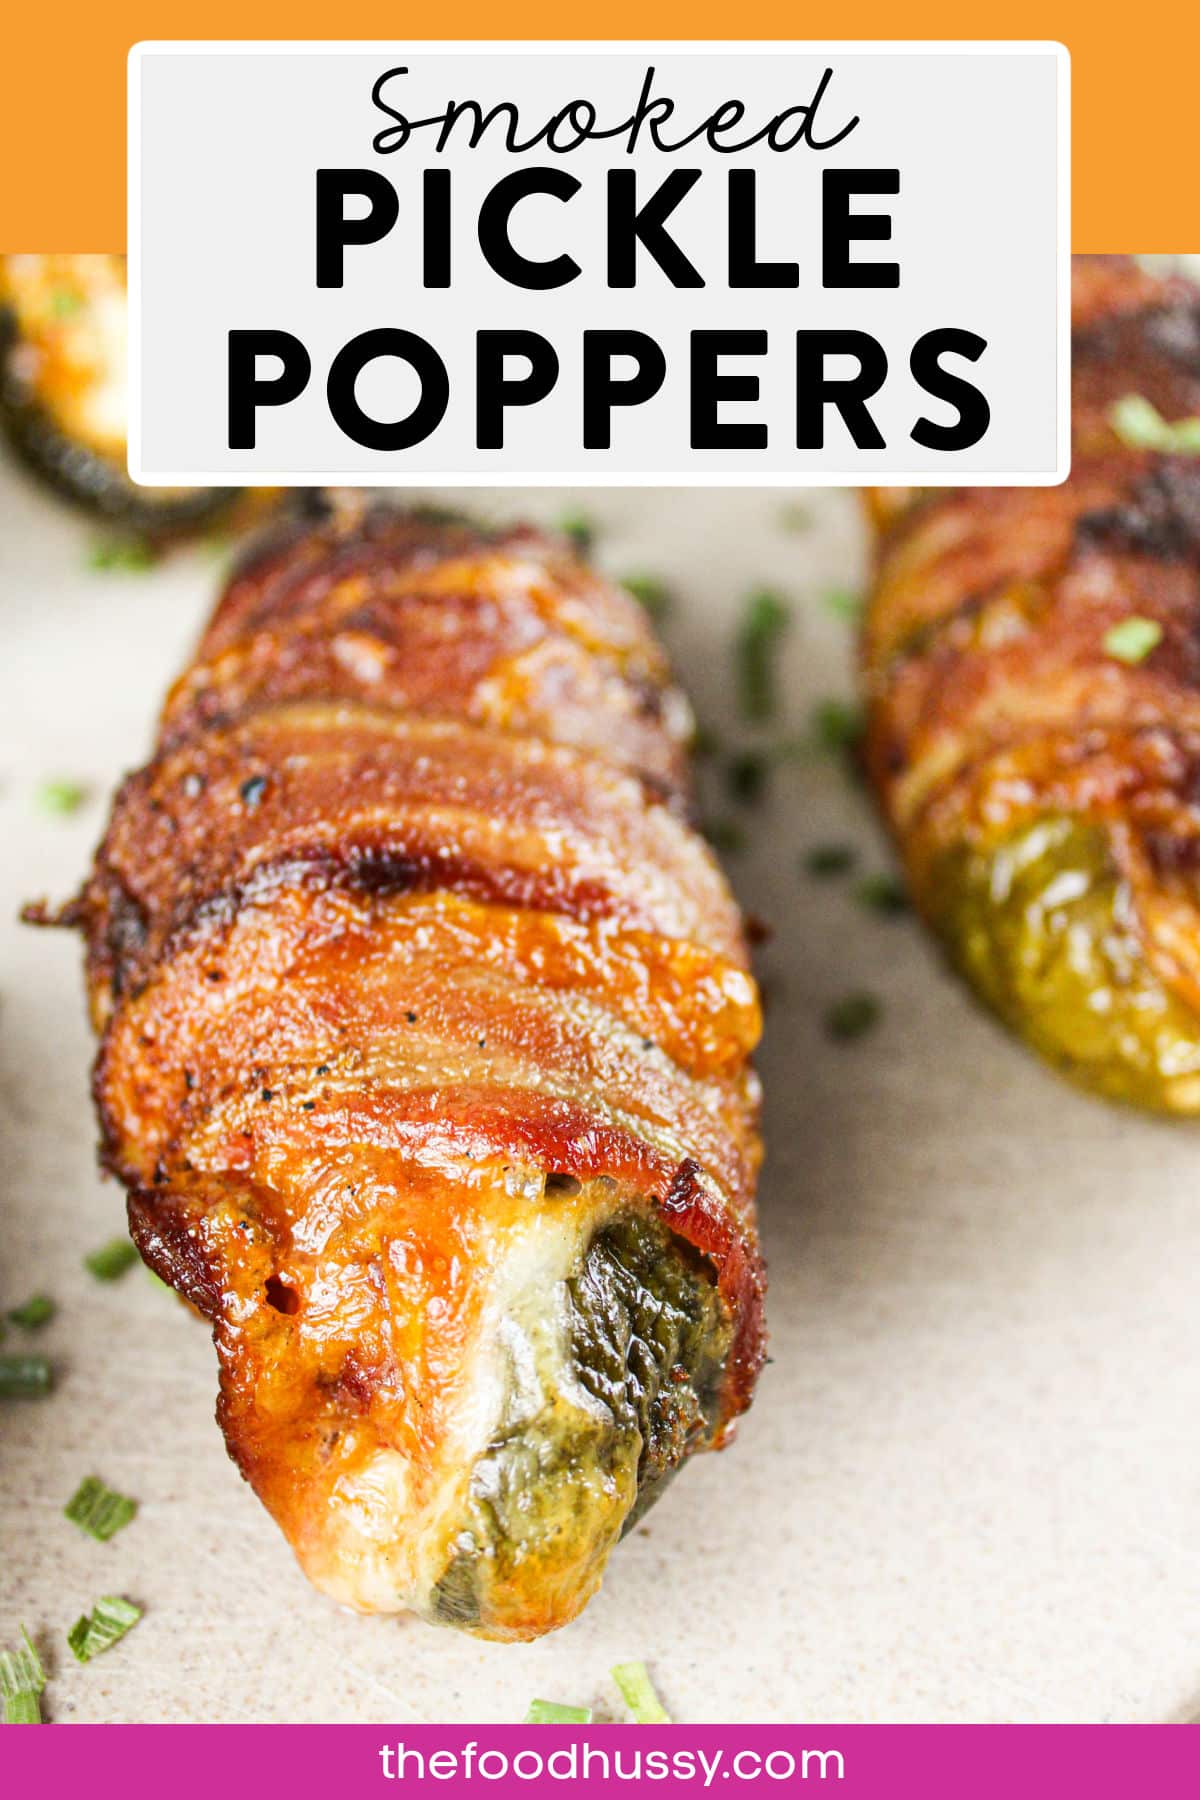 Smoked Pickle Poppers will have you huddled in a corner snarfing these down with cream cheese and pickle juice running down your chin! I should know - there's an Instagram story with me doing just that!  via @foodhussy